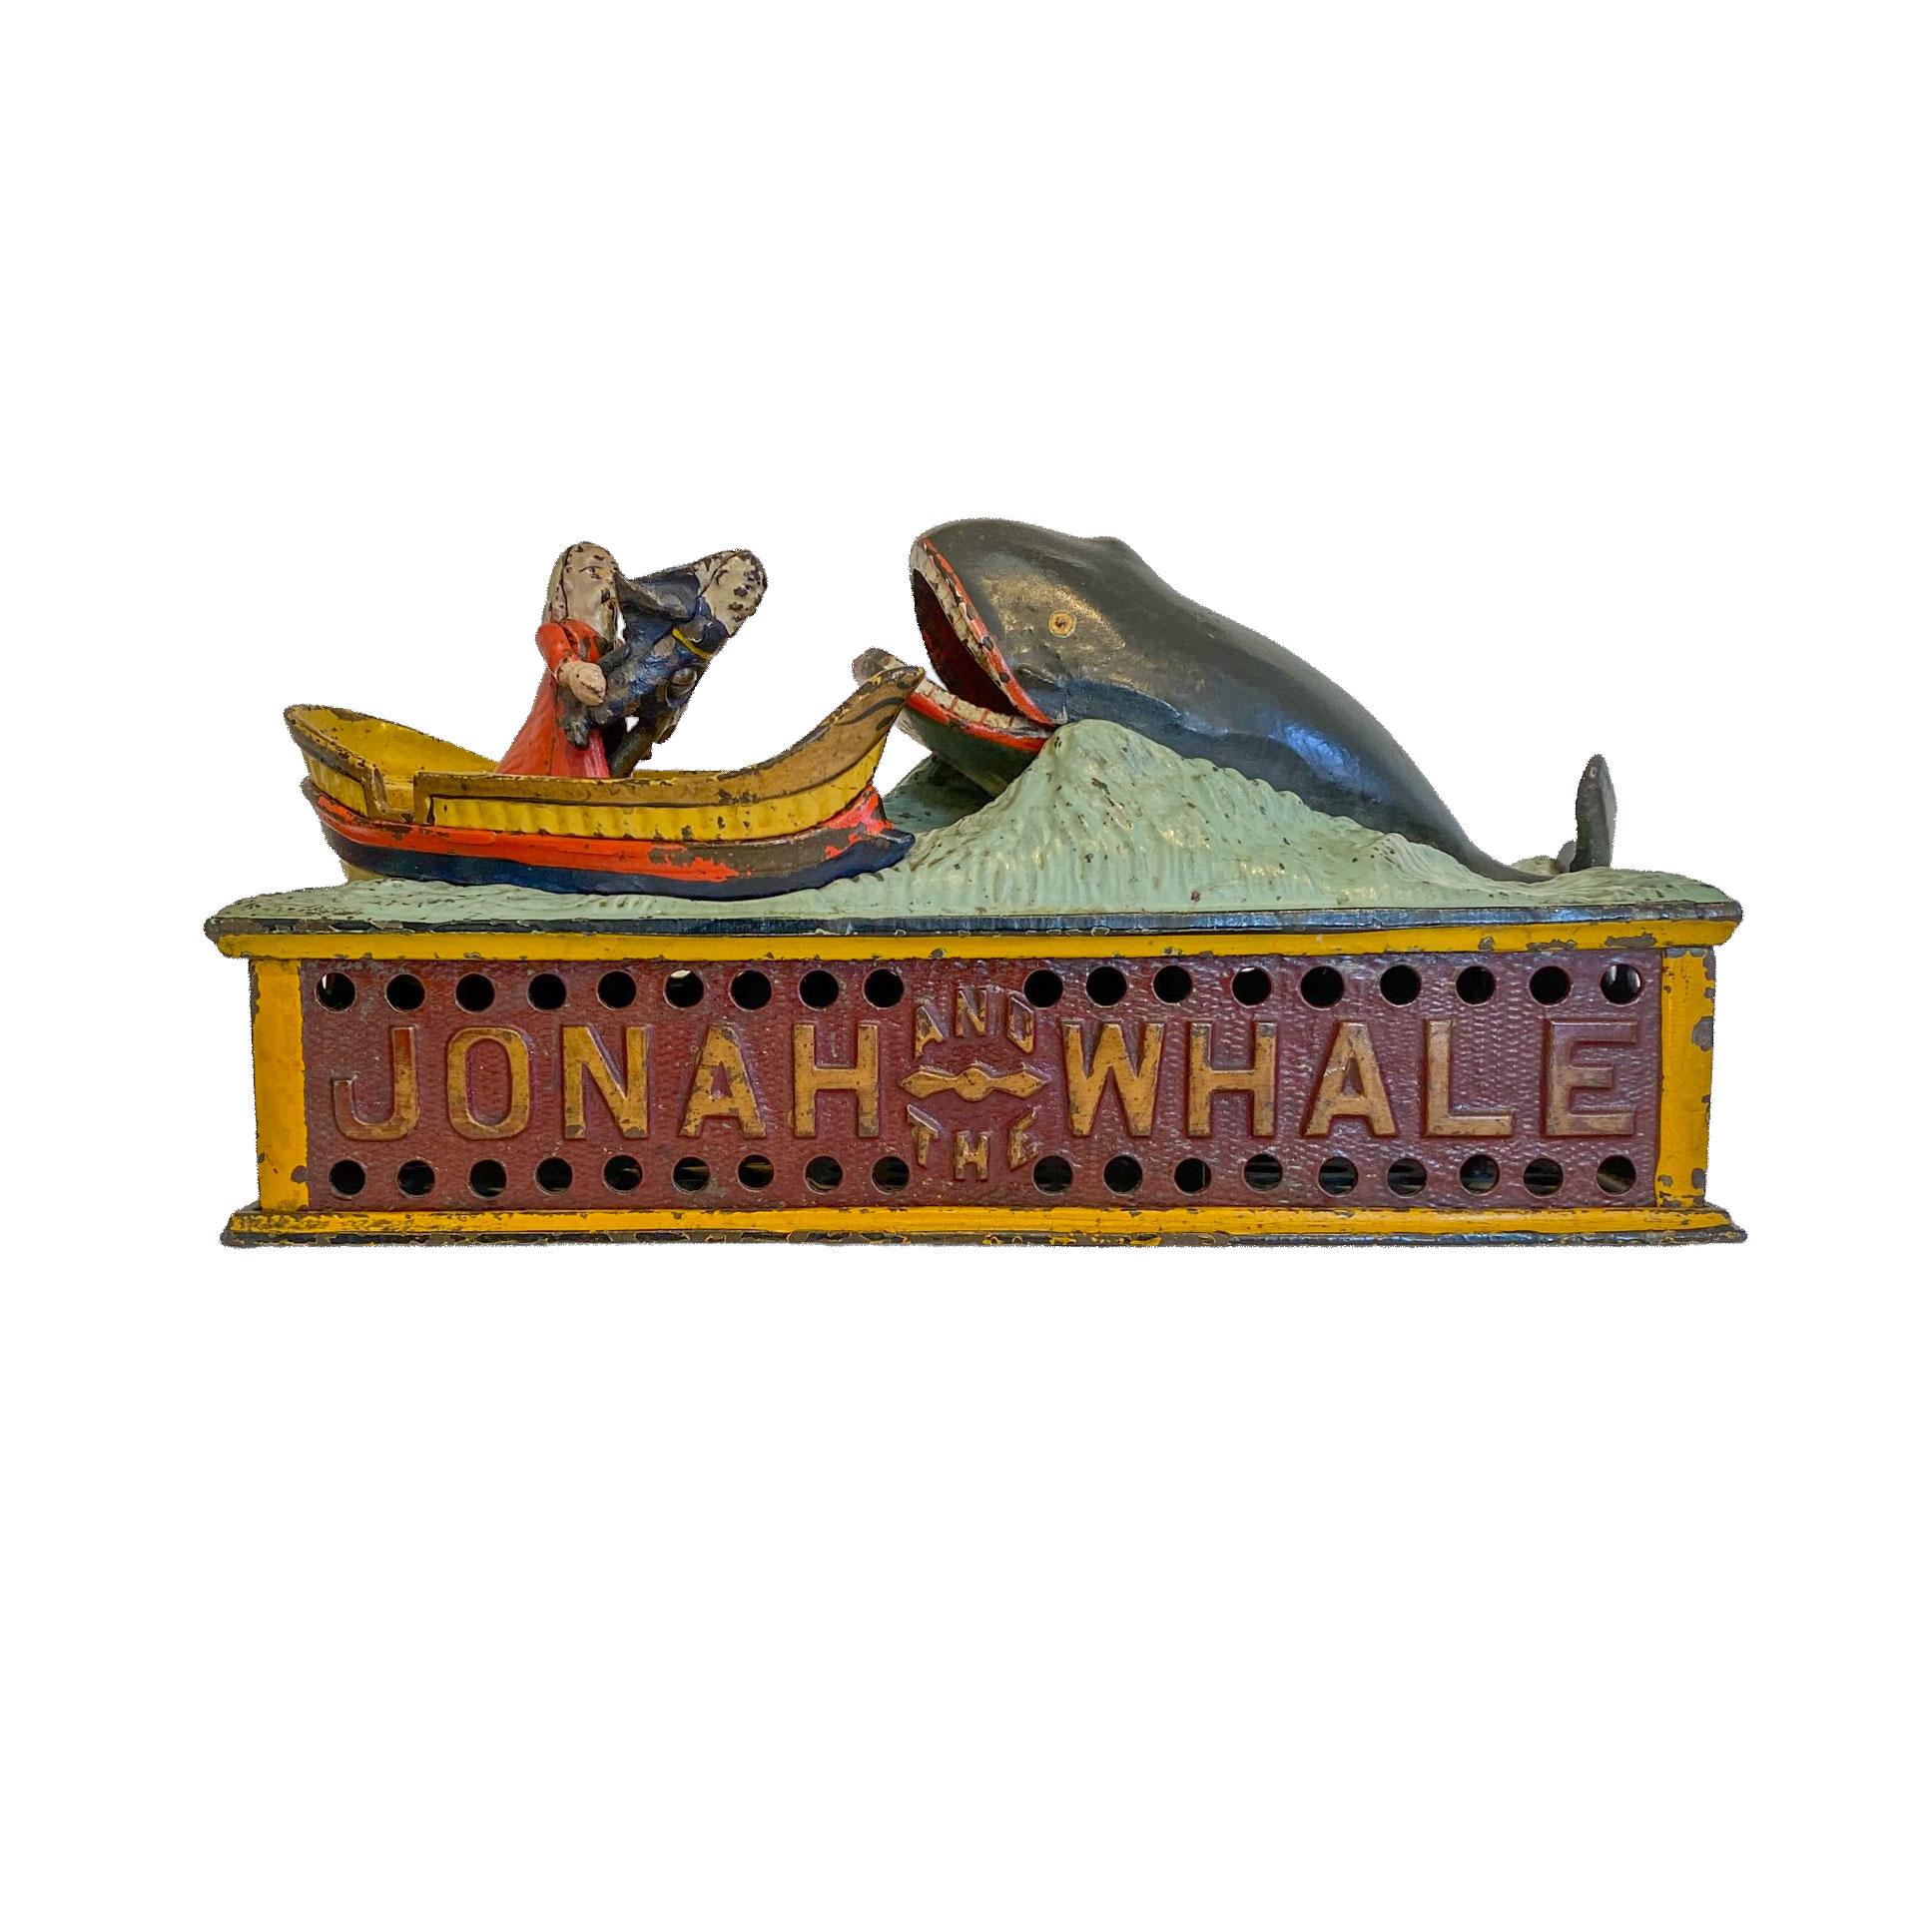 Jonah and the Whale Bank, patented on July 15th in 1890 by Charles G. Shepard and Peter Adams and manufactured by Shepard Hardware Company of Buffalo, New York
Original paint in excellant condition.



